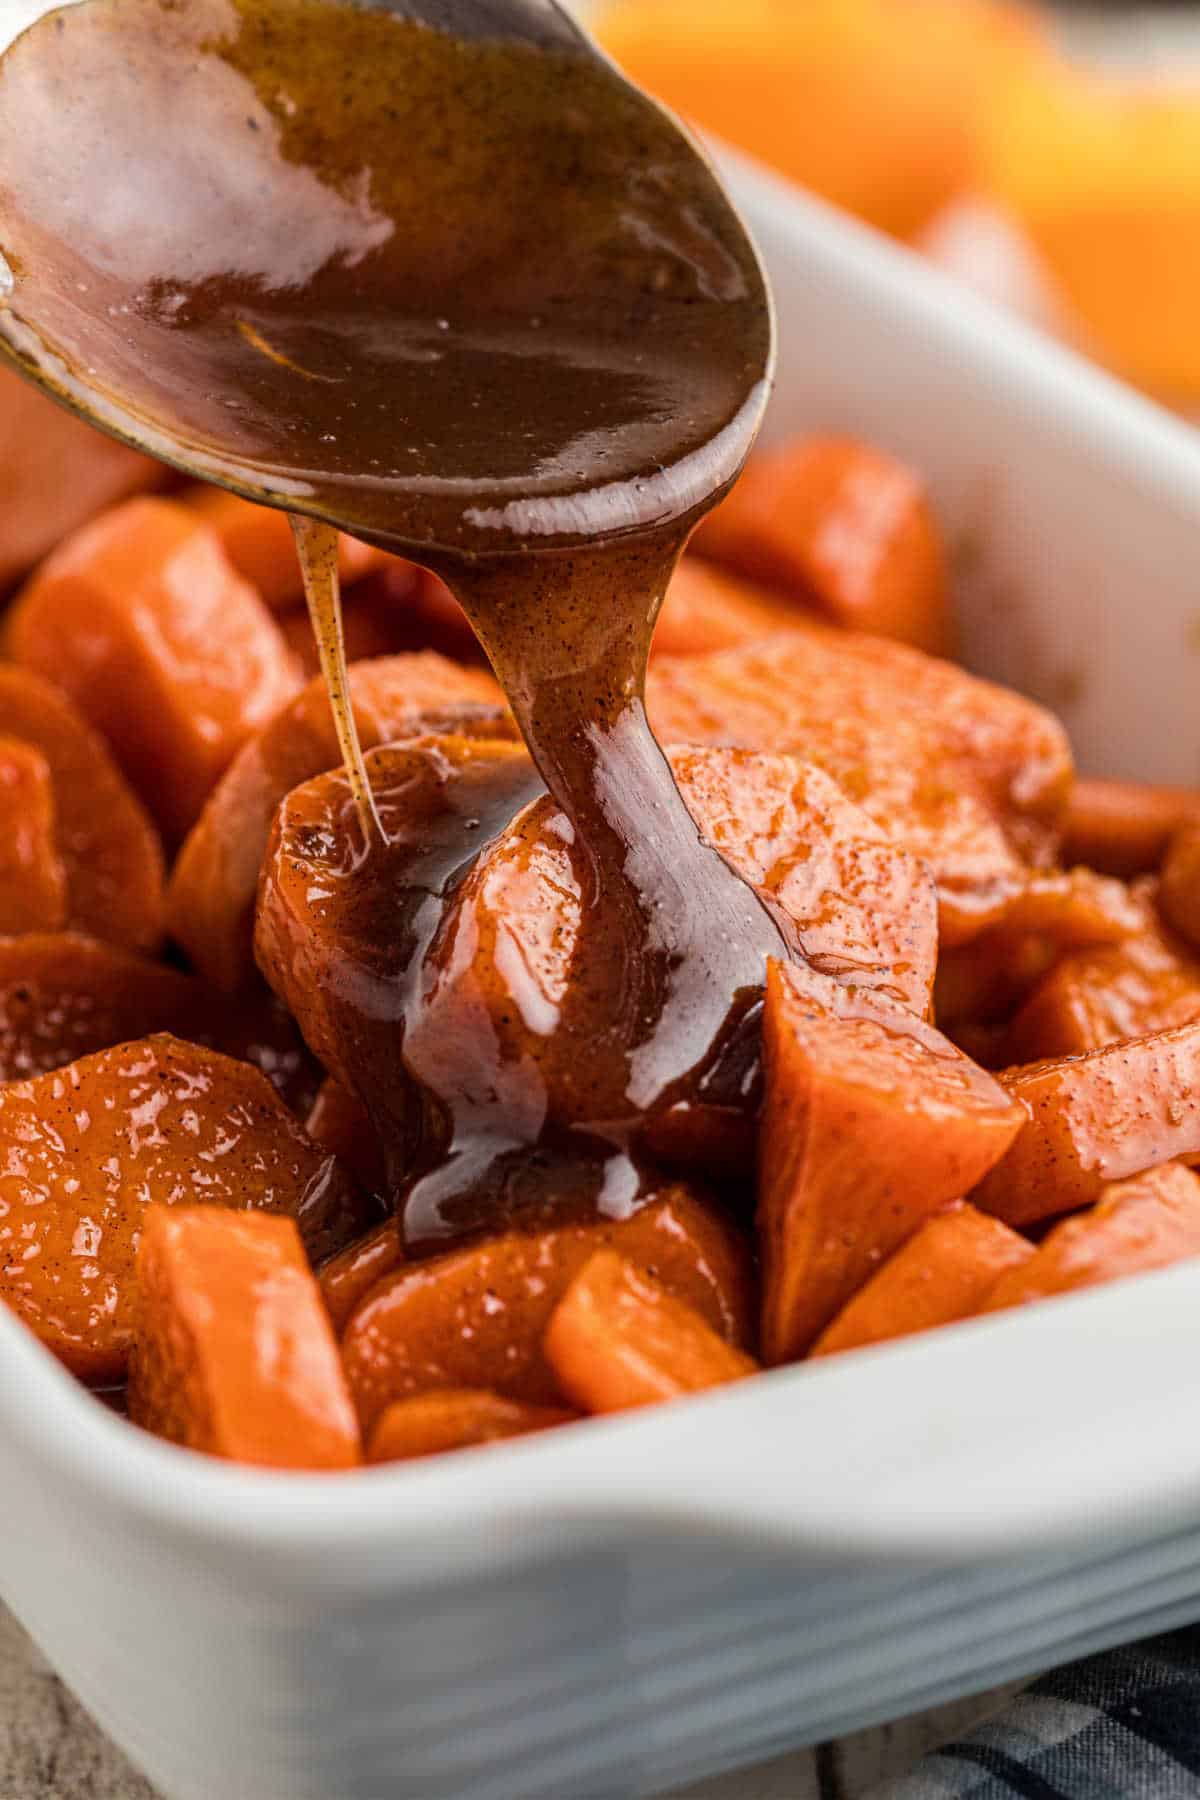 A dish full of candied yams with a treacle being poured over the top.